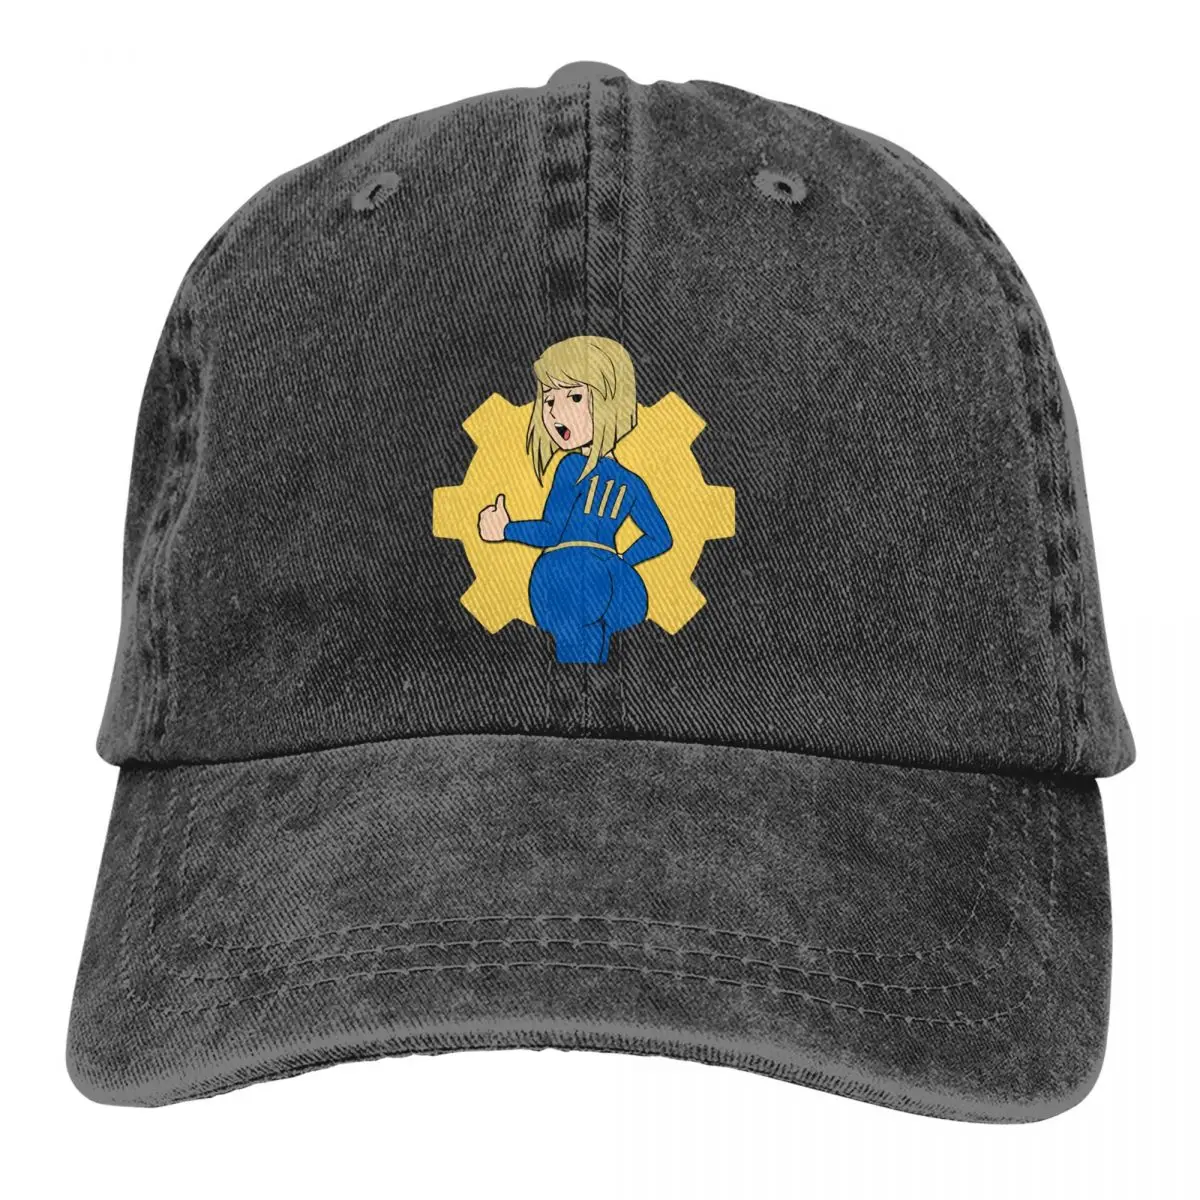 

Washed Men's Baseball Cap Vault Girl Trucker Snapback Caps Dad Hat Fallout Shelter Resident Strategy Game Golf Hats